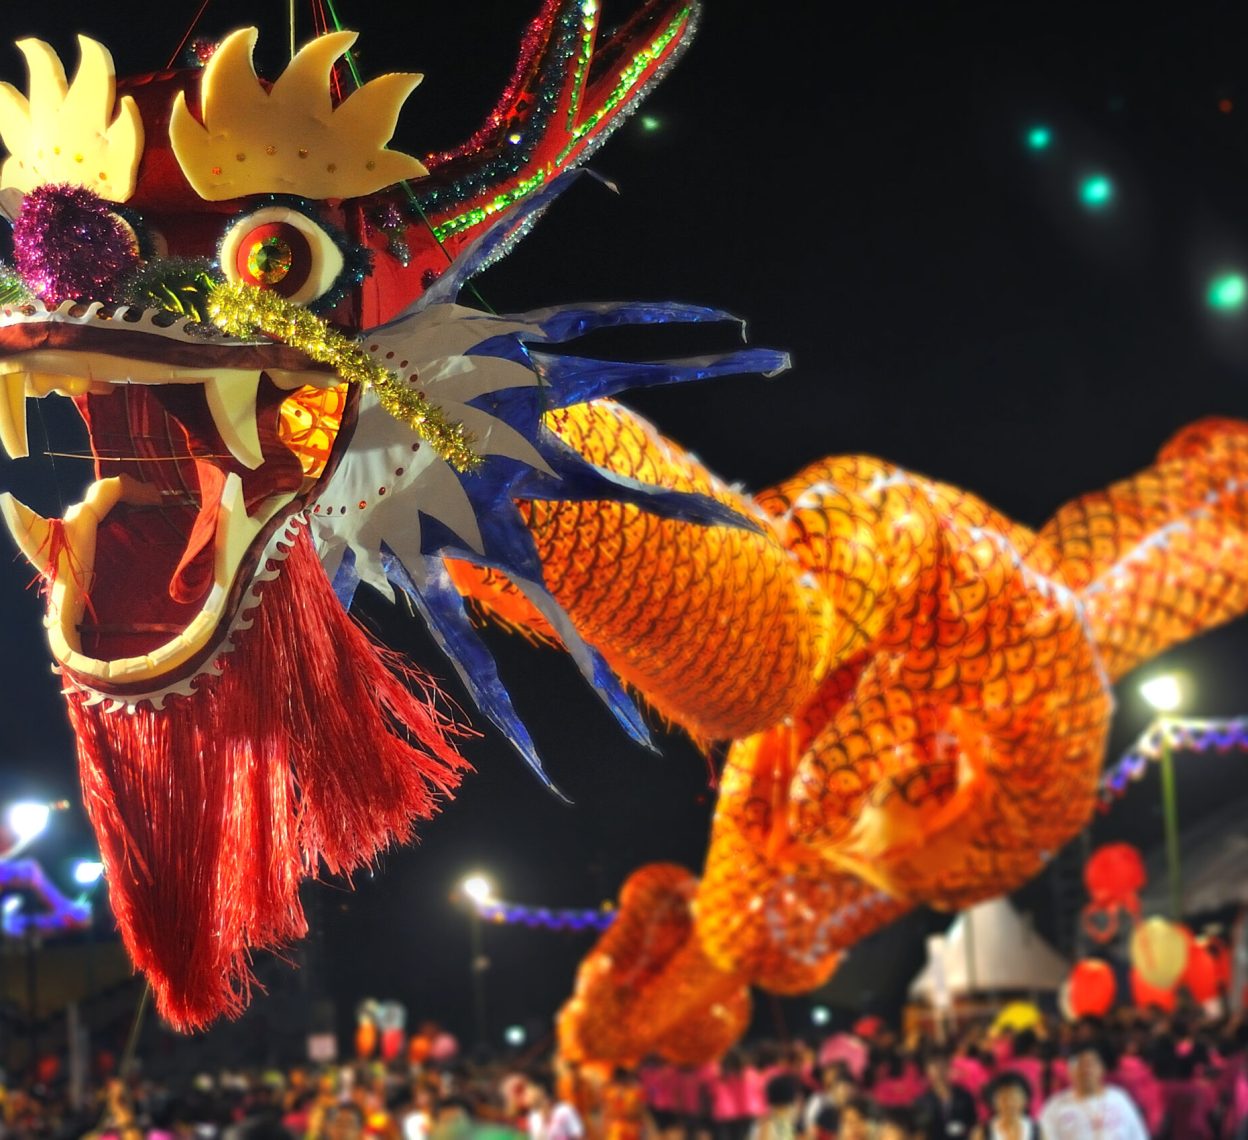 The longest floating air dragon in the Singapore Chingay Parade.